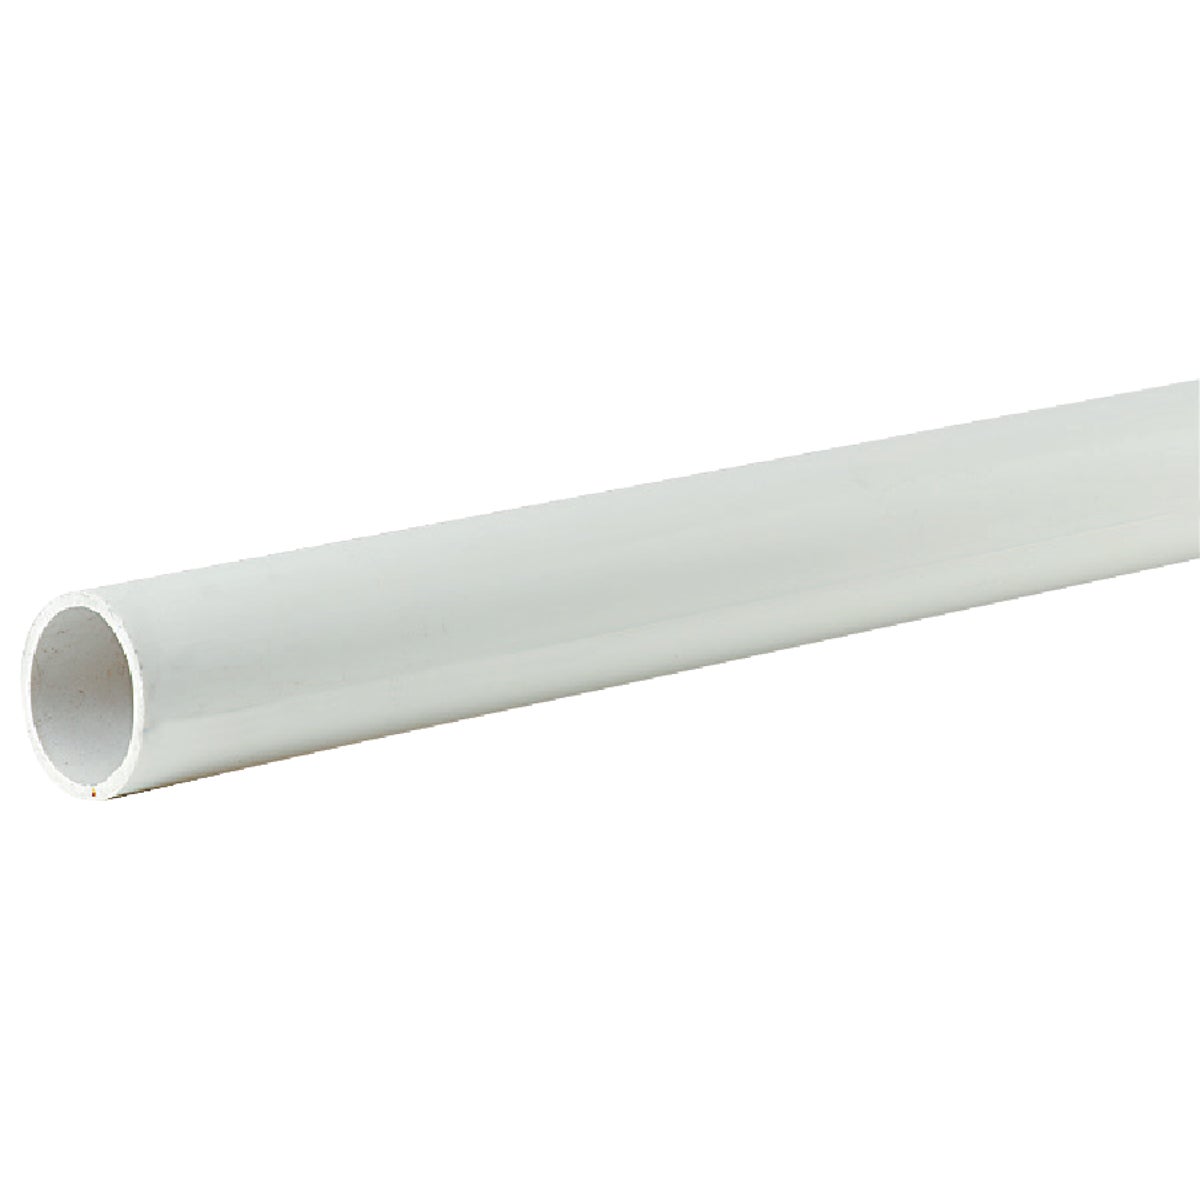 Charlotte Pipe 2 In. x 20 Ft. Cold Water PVC Pressure Pipe, SDR 26, Belled End